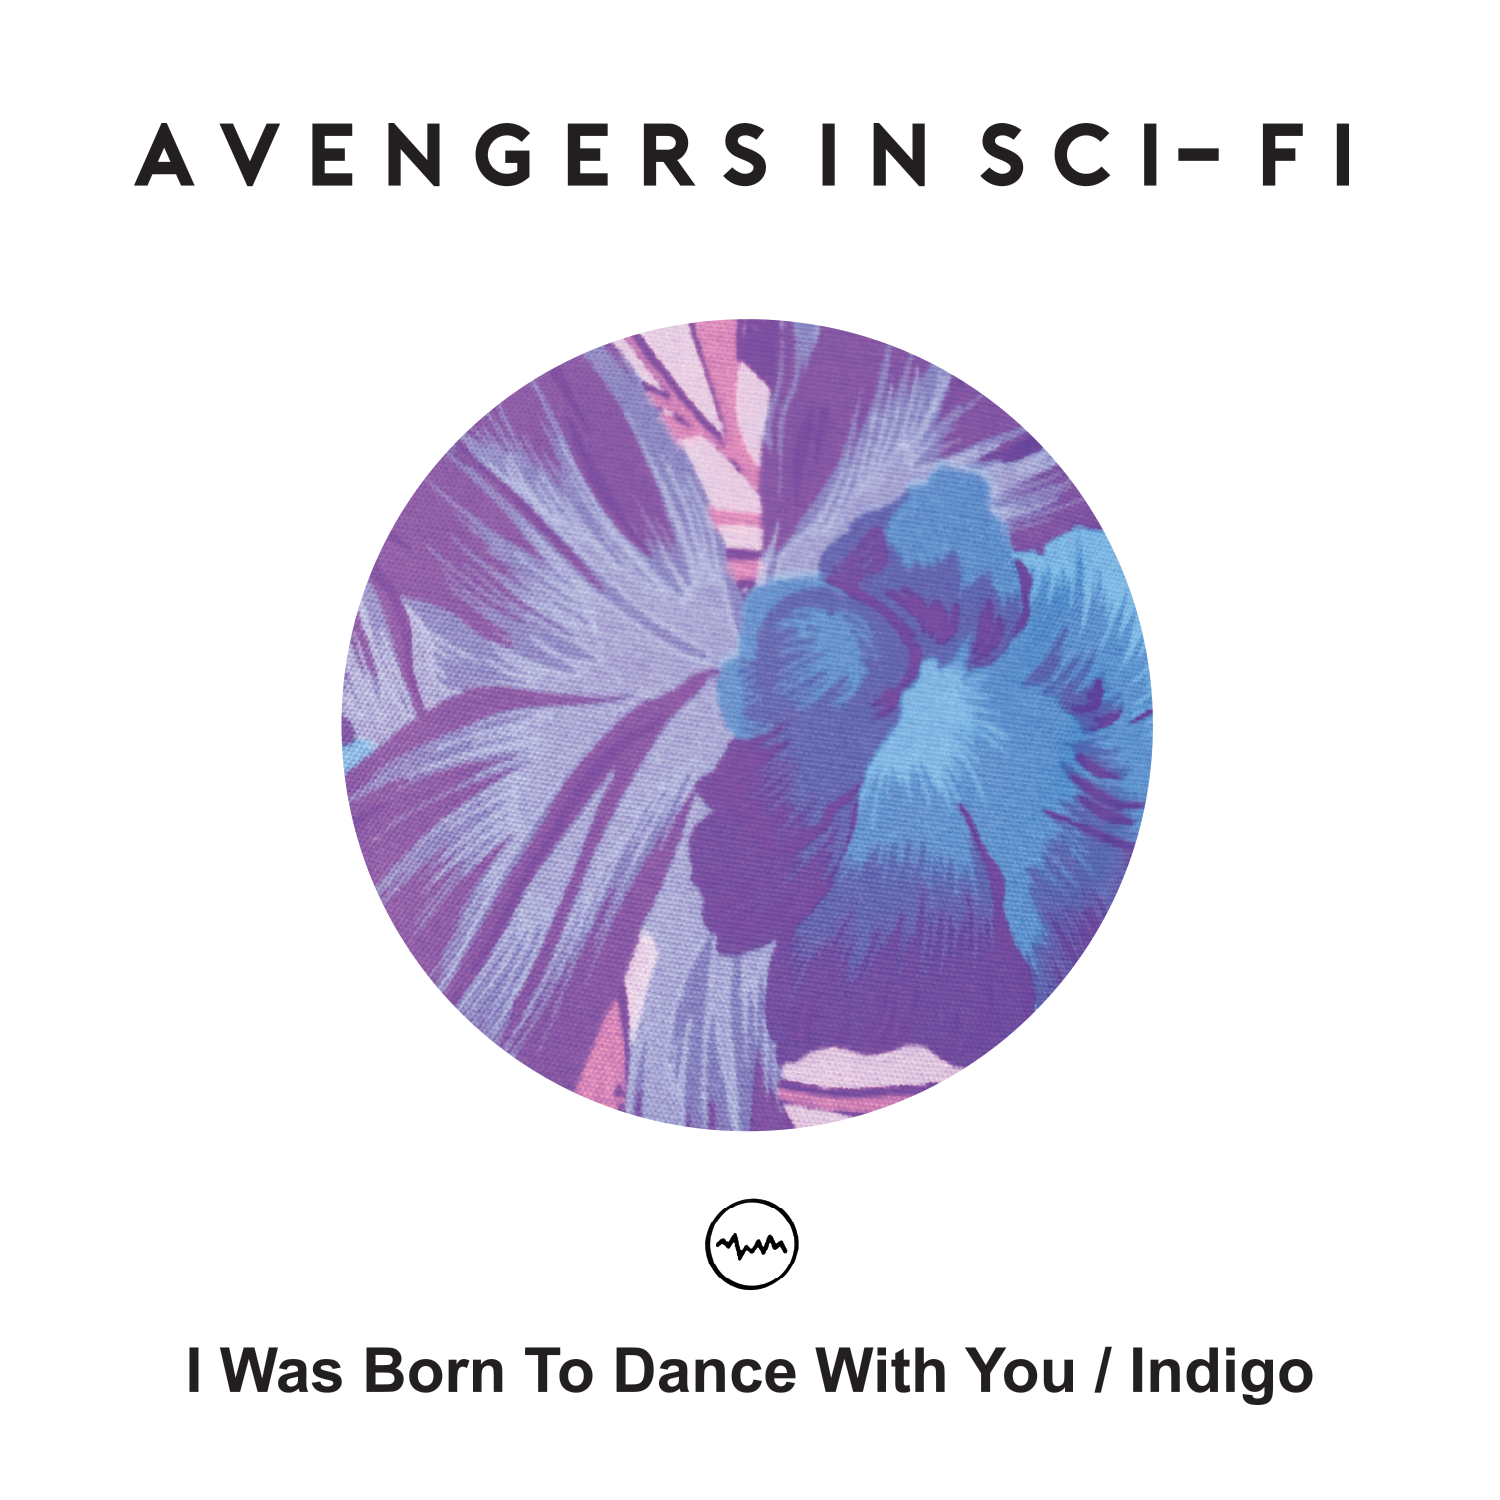 avengers in sci-fi NEW Single I WAS BORN TO DANCE WITH YOU / INDIGO RELEASE